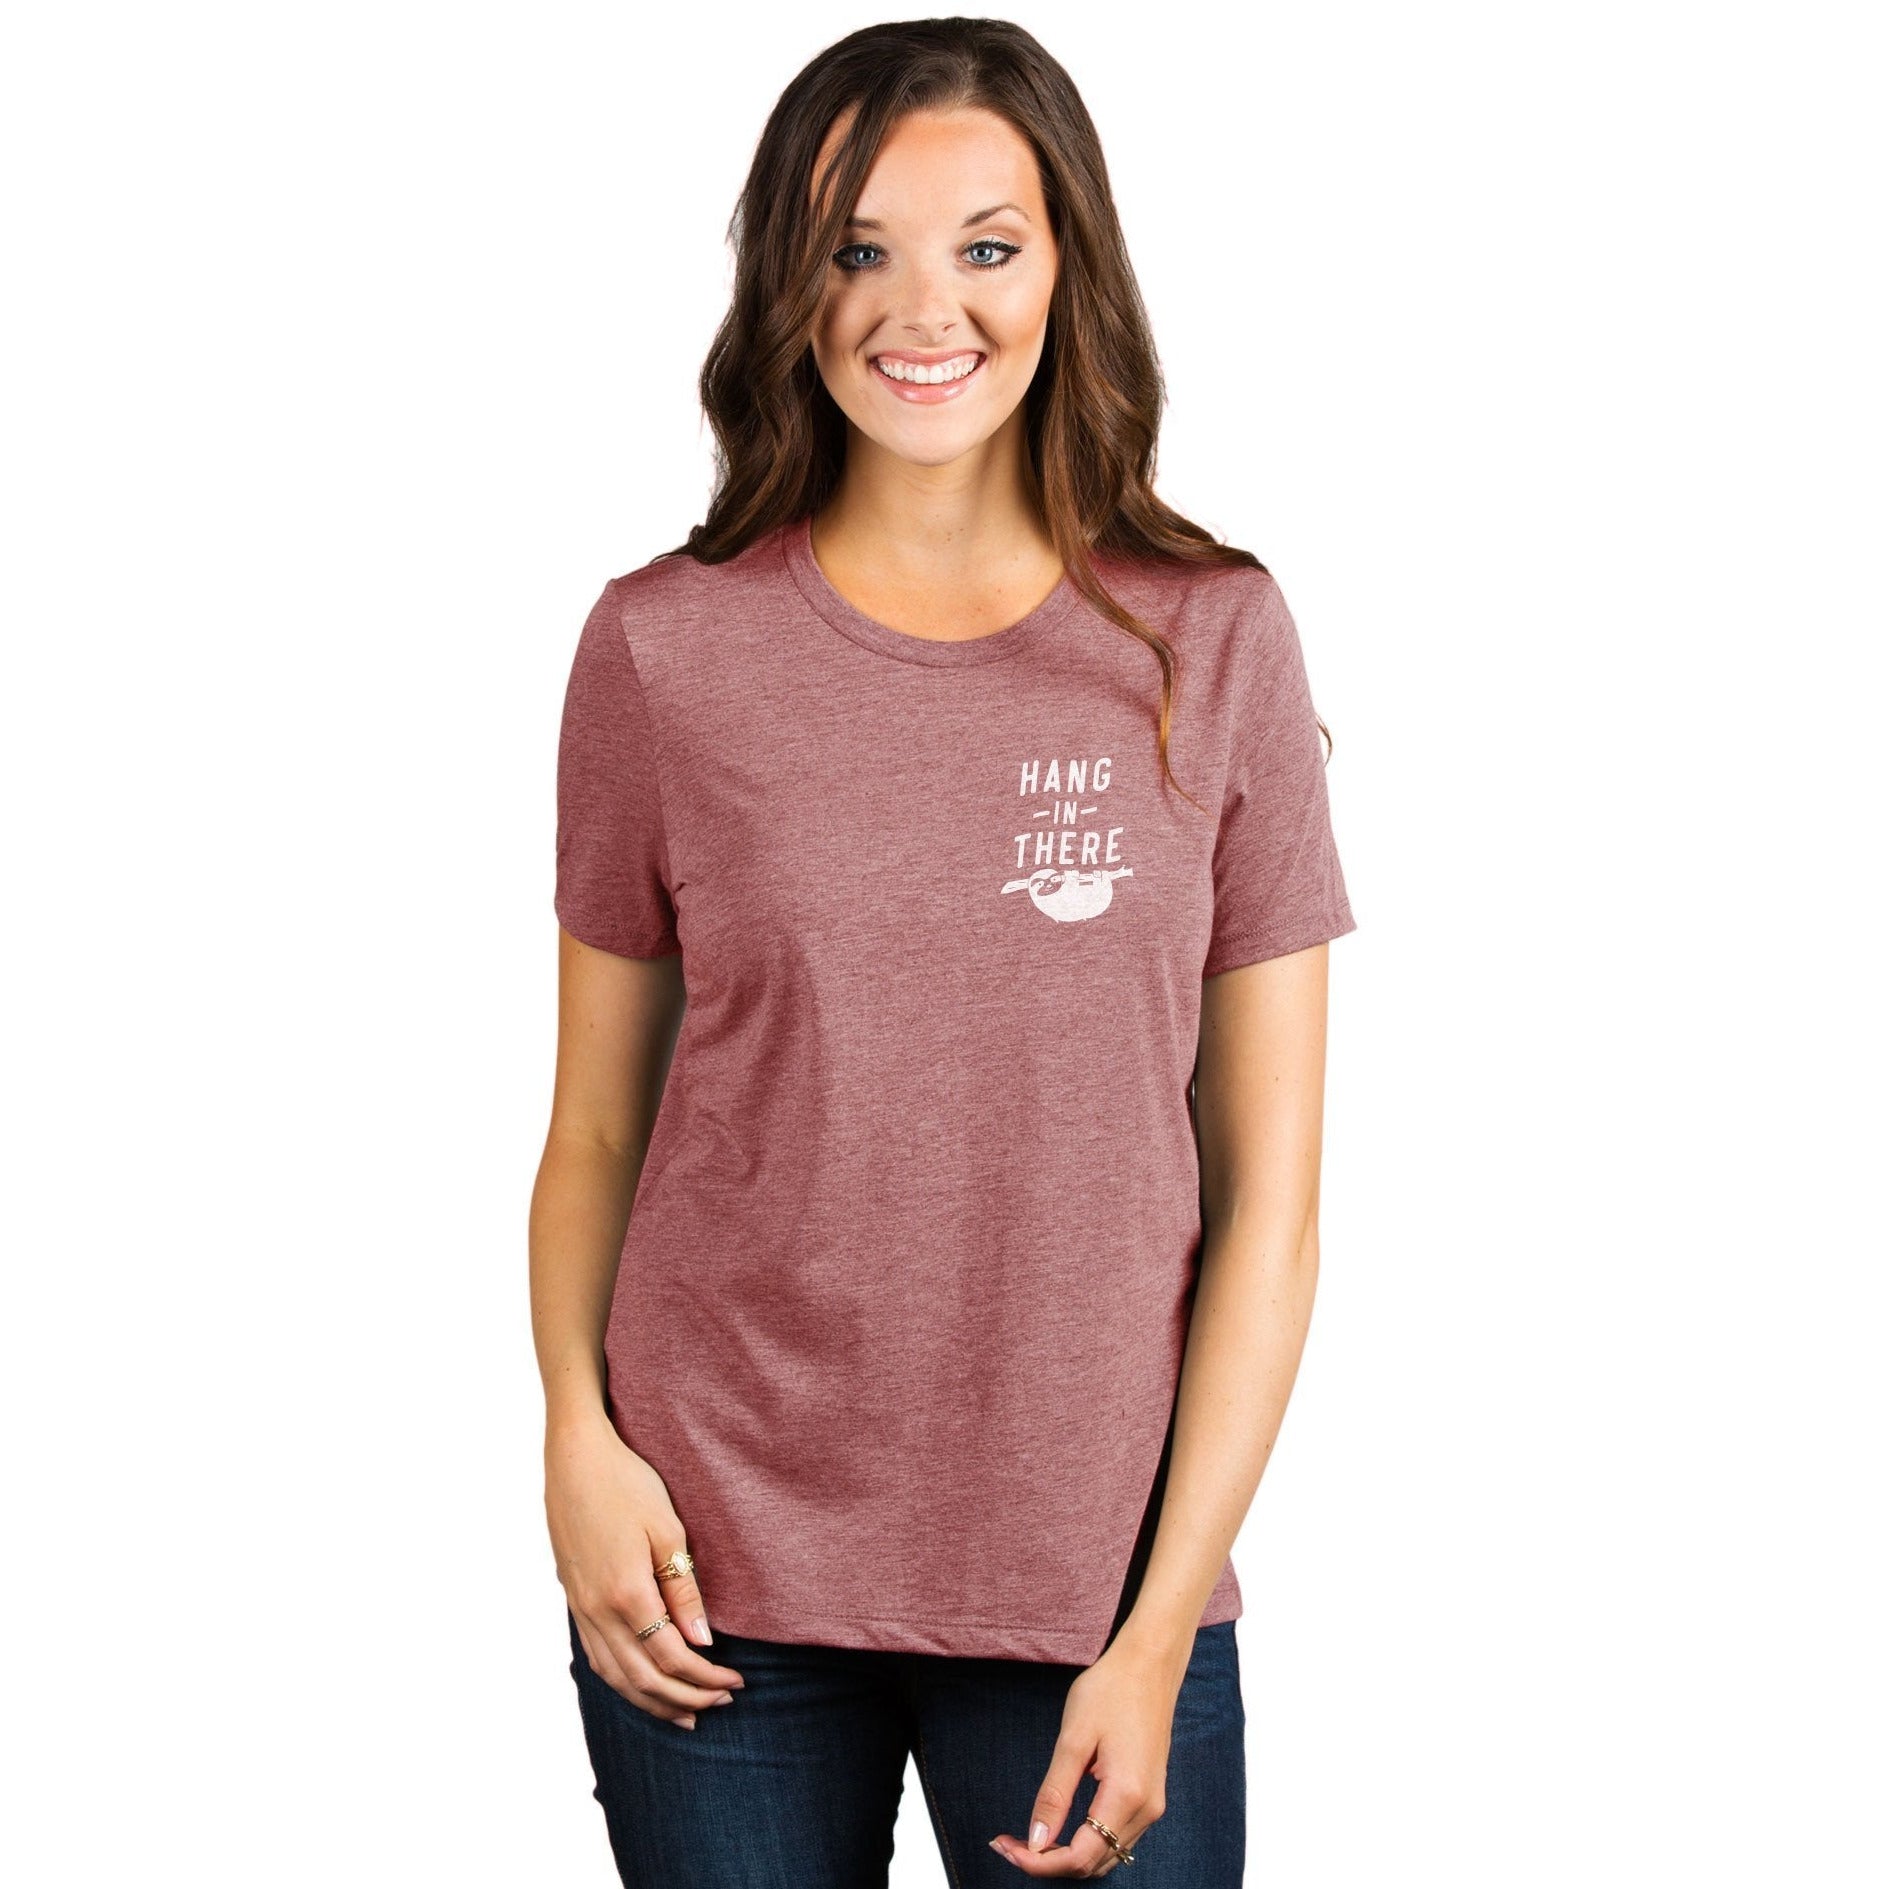 Hang In There Women's Relaxed Crewneck T-Shirt Top Tee Heather Rouge Model
